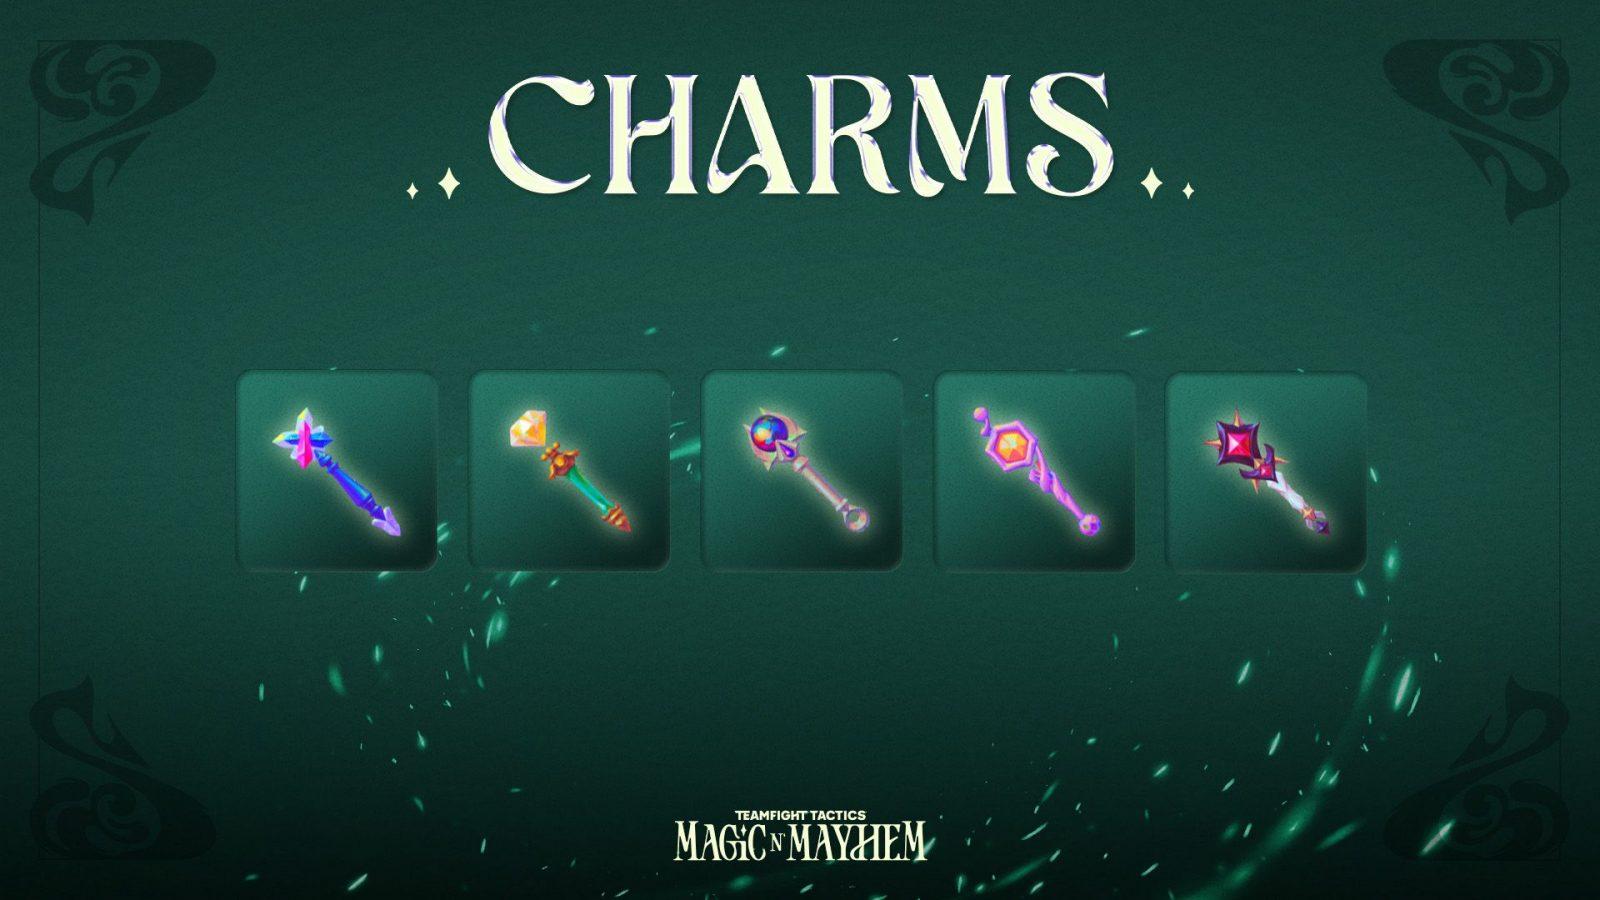 Charms in TFT